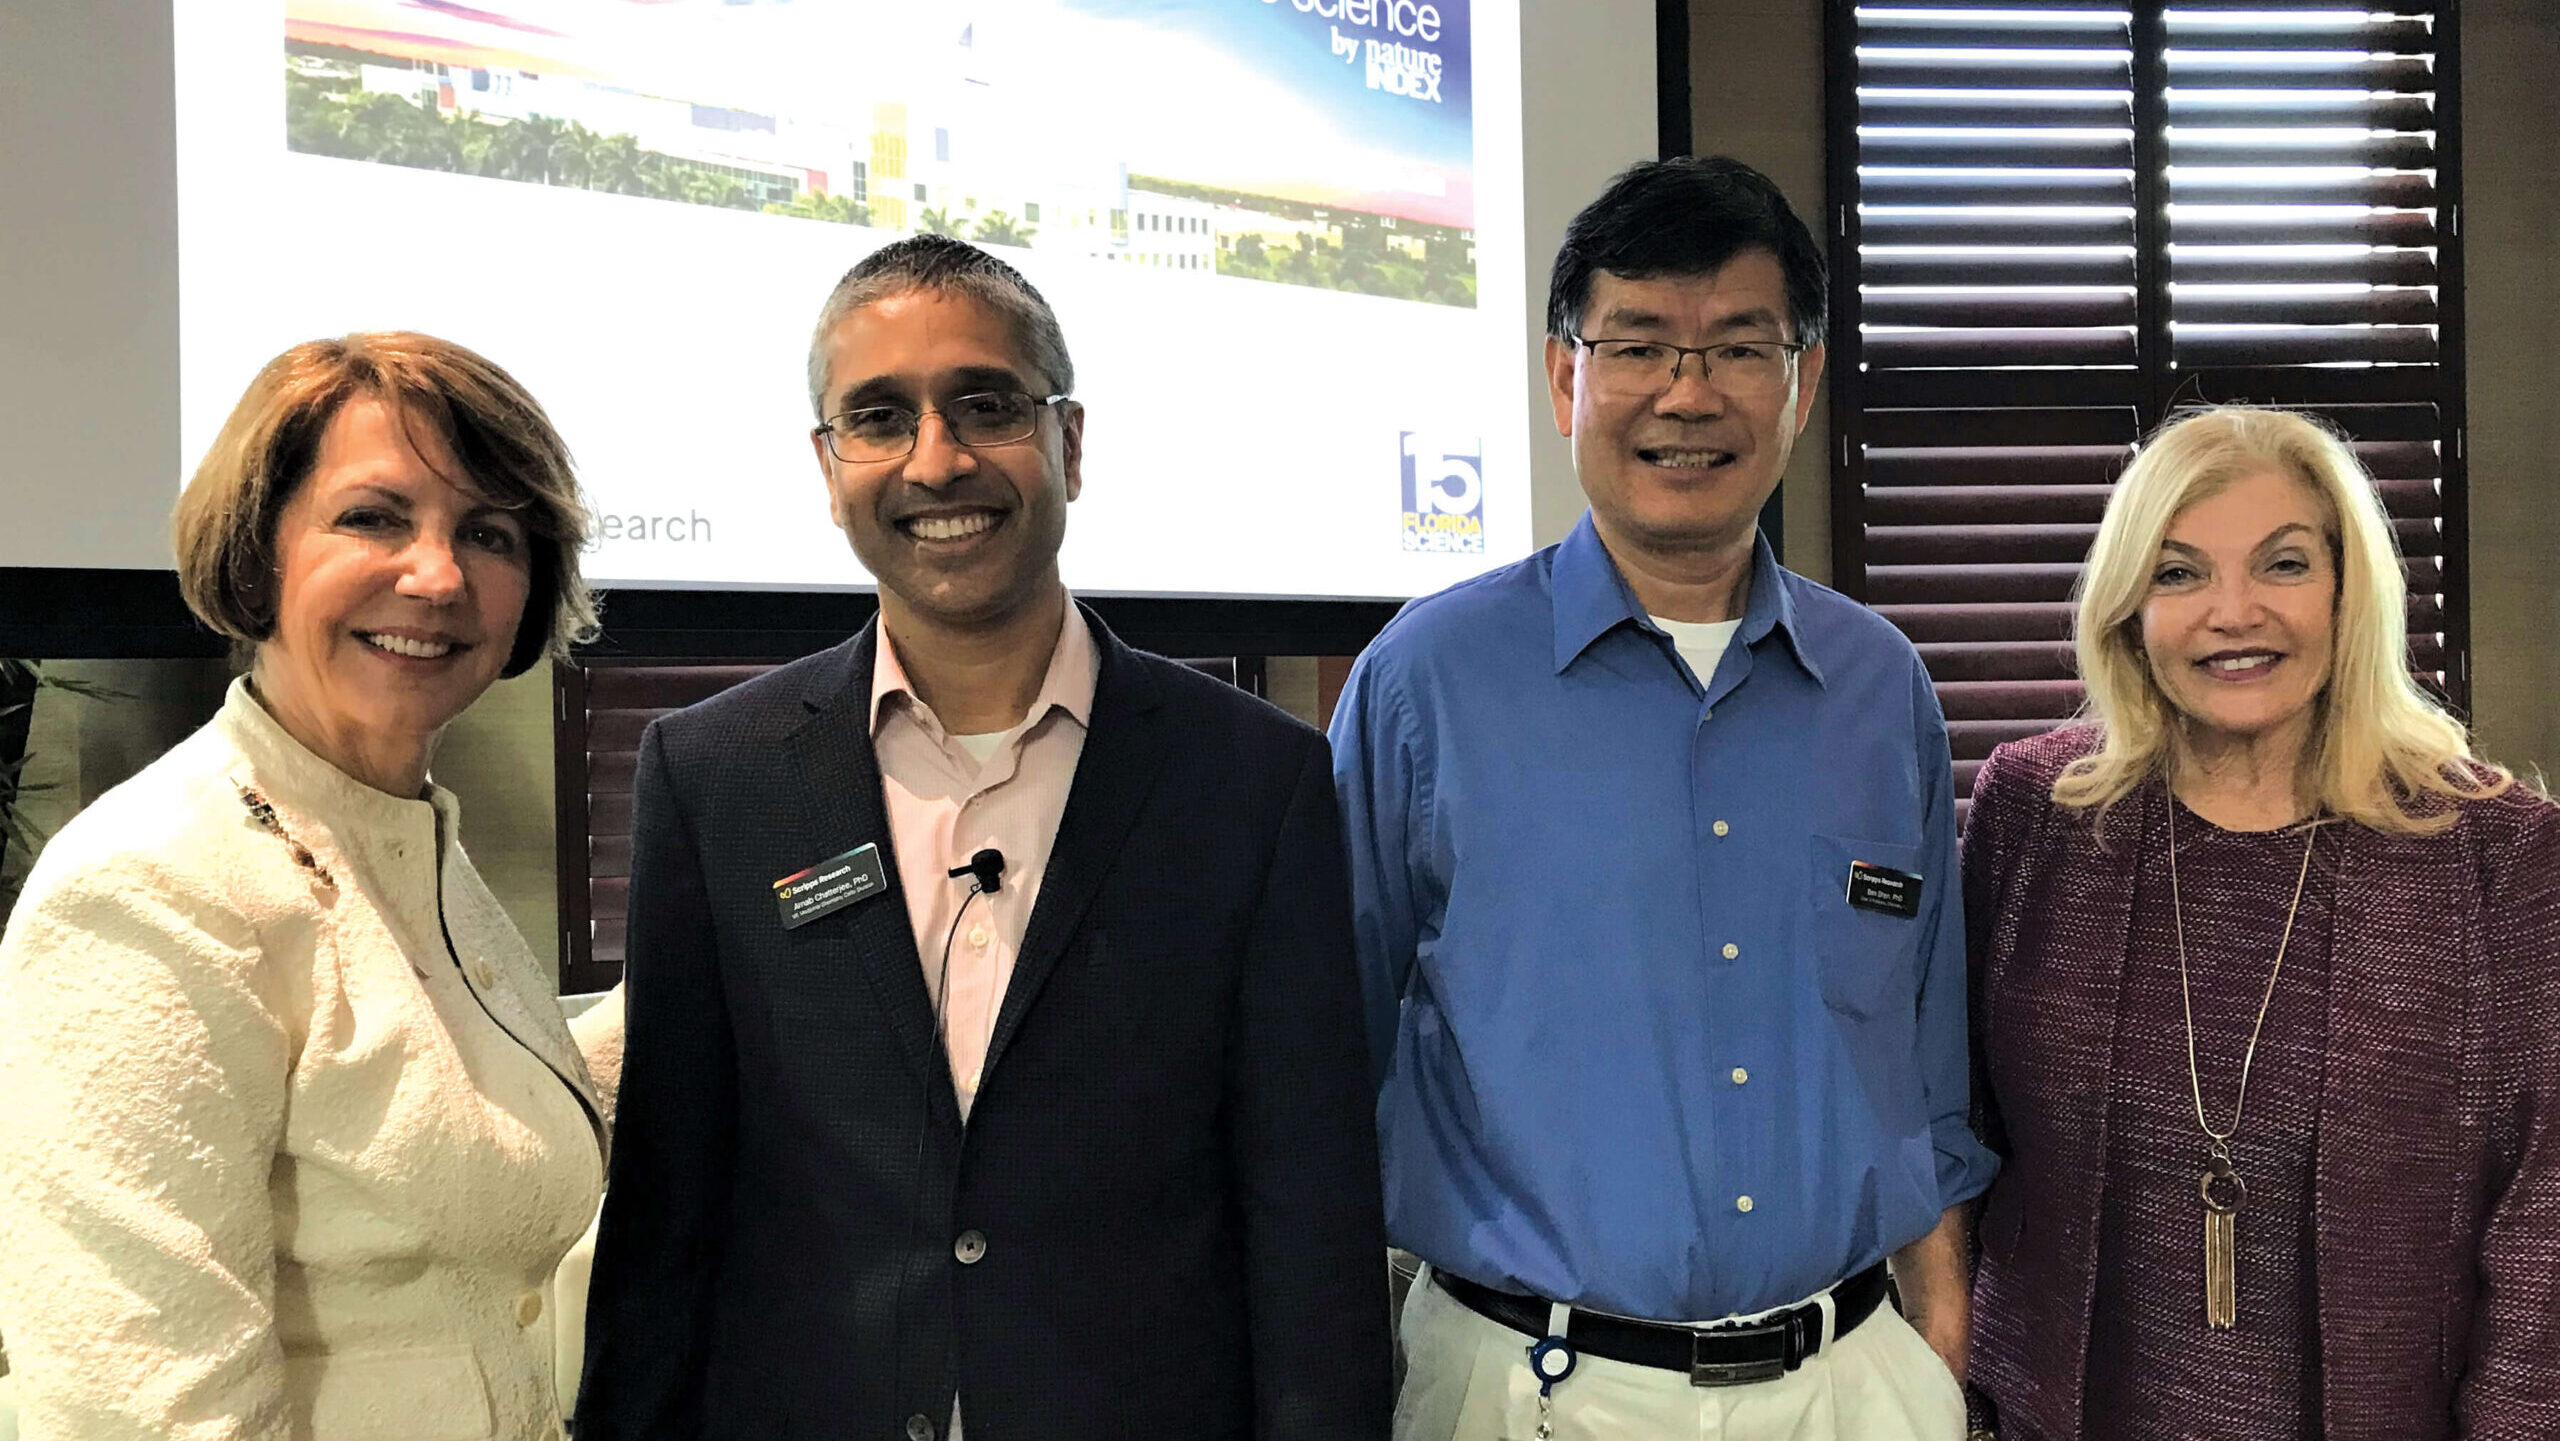 Scripps Research chemists Arnab Chatterjee, PhD, and Ben Shen, PhD, spoke about innovations on both coasts at Food for Thought Luncheon